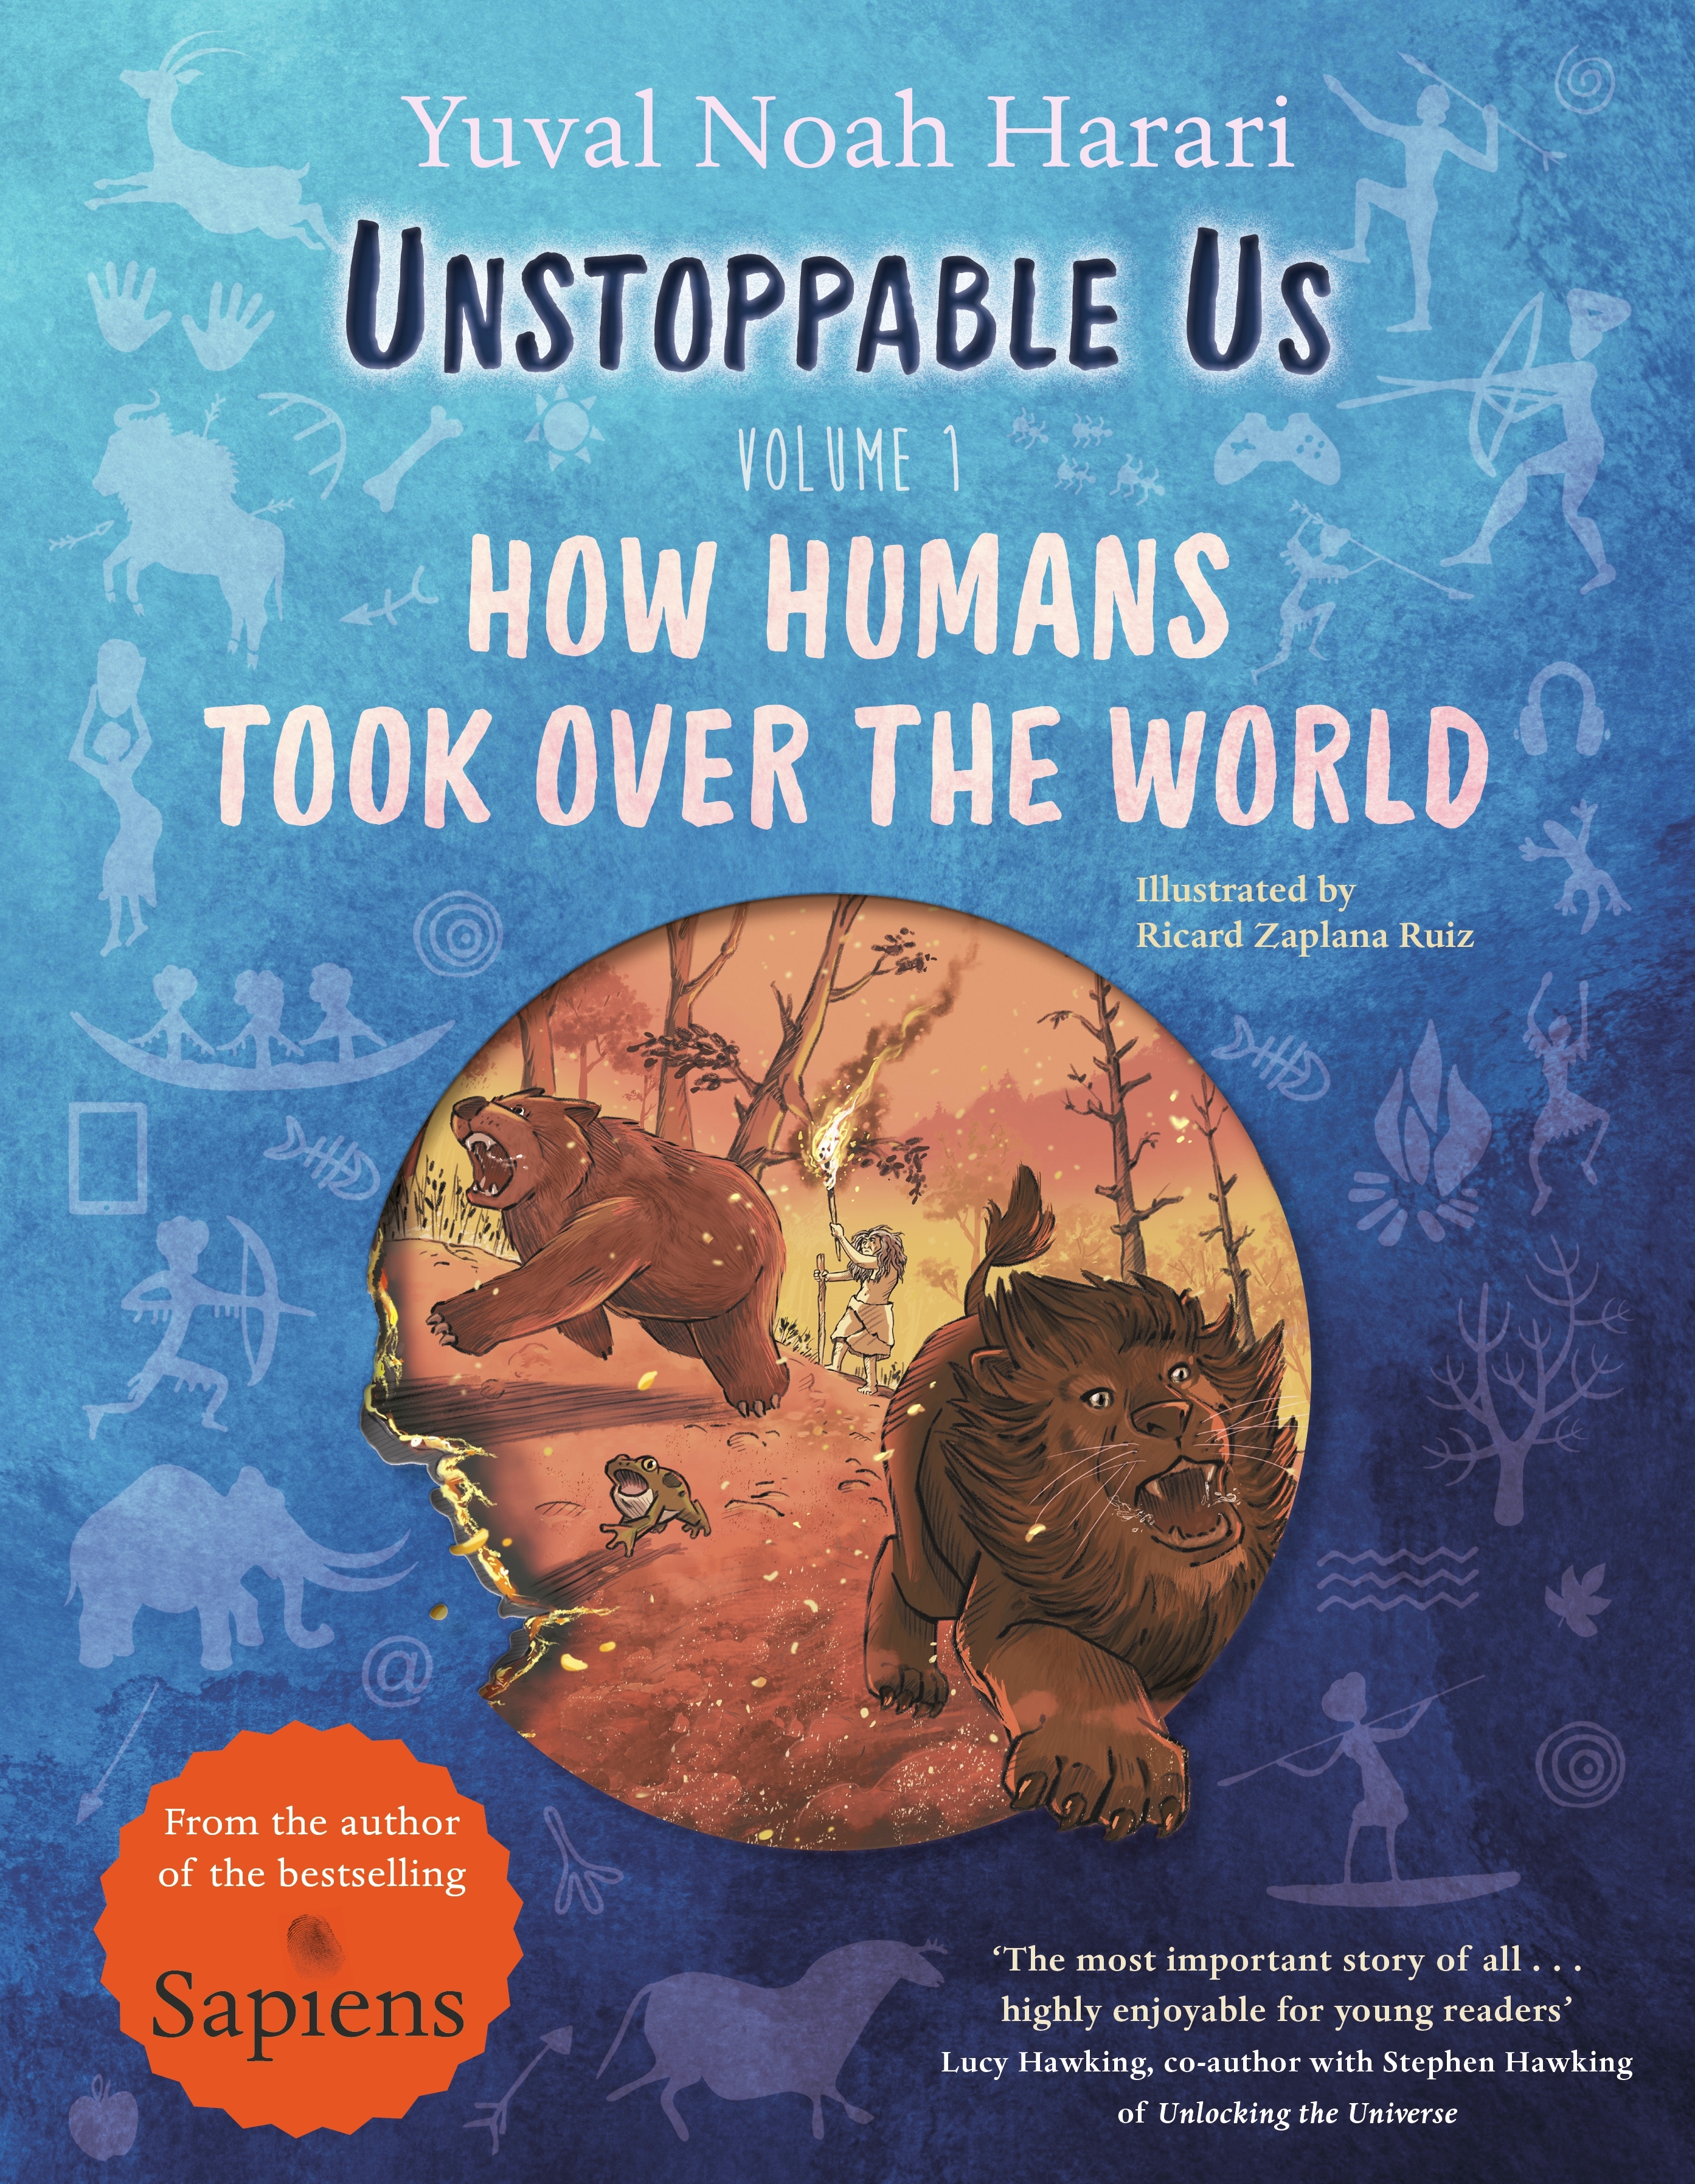 UNSTOPPABLE US VOLUME 1: HOW HUMANS TOOK OVER THE WORLD